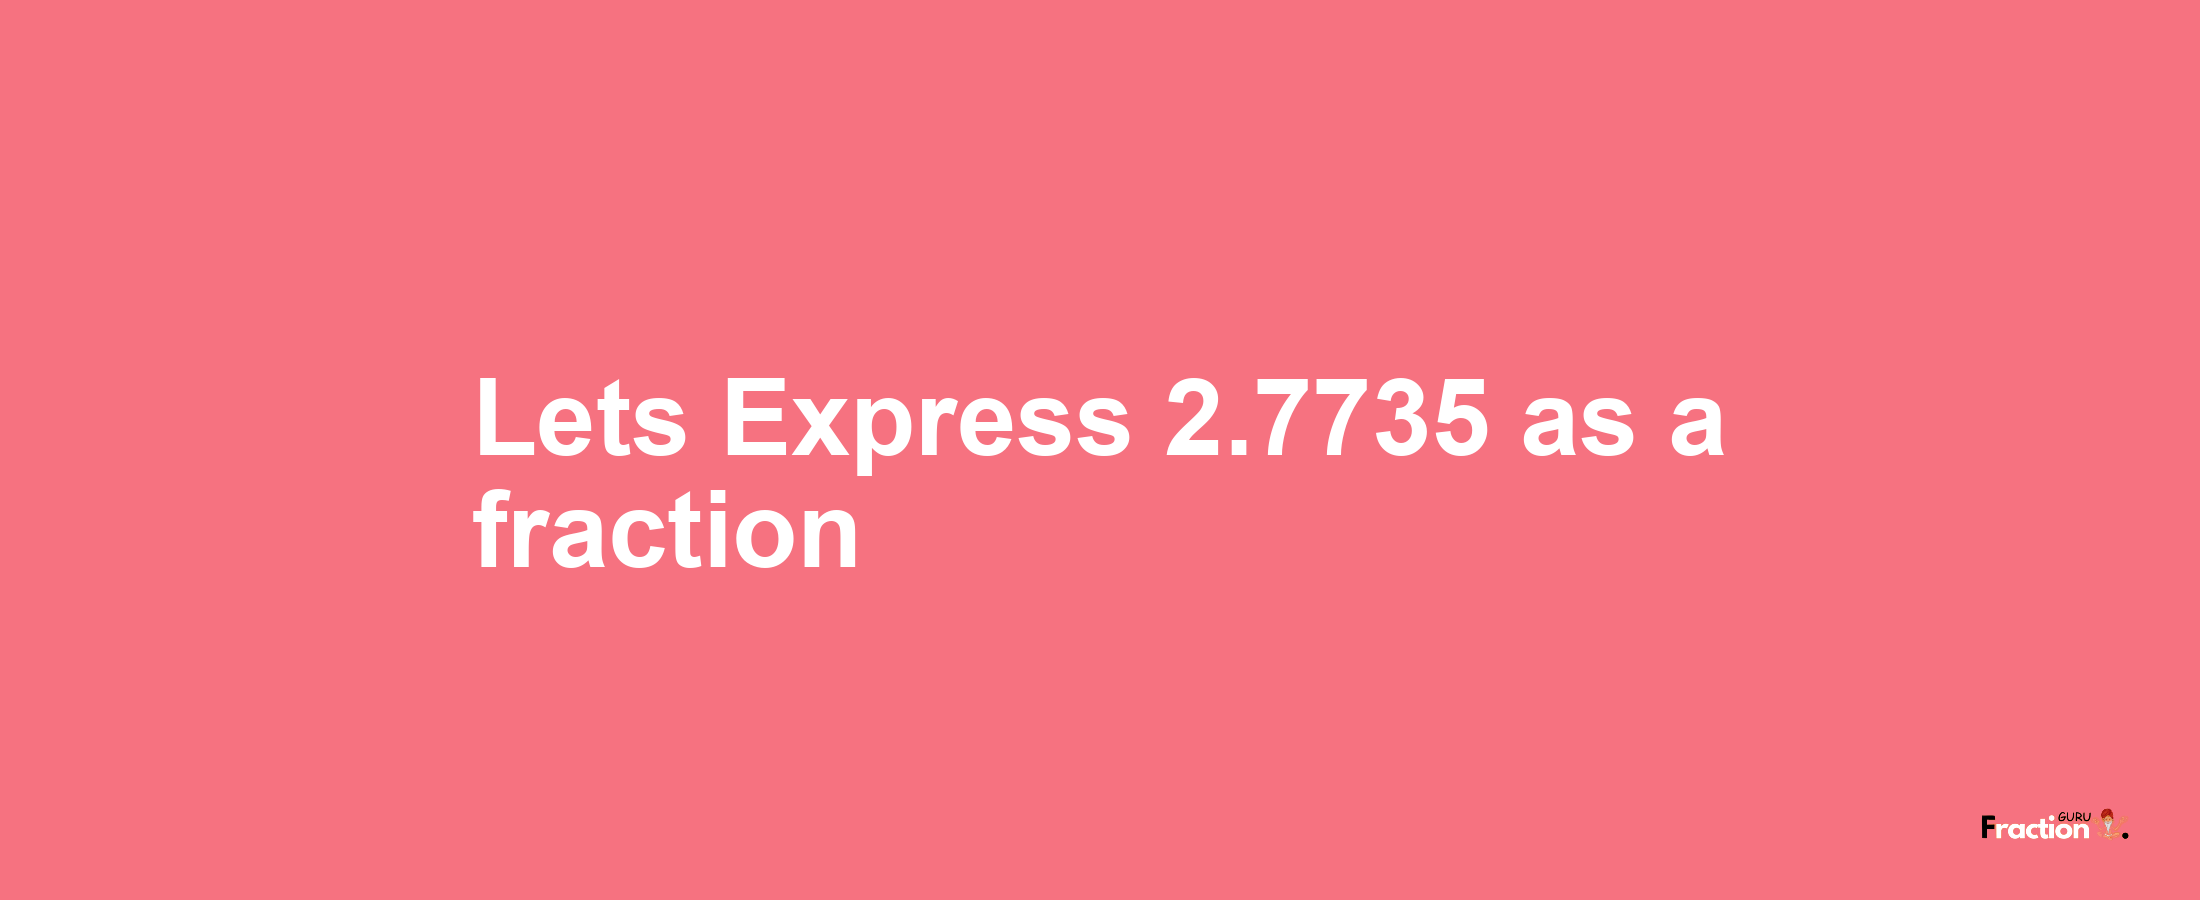 Lets Express 2.7735 as afraction